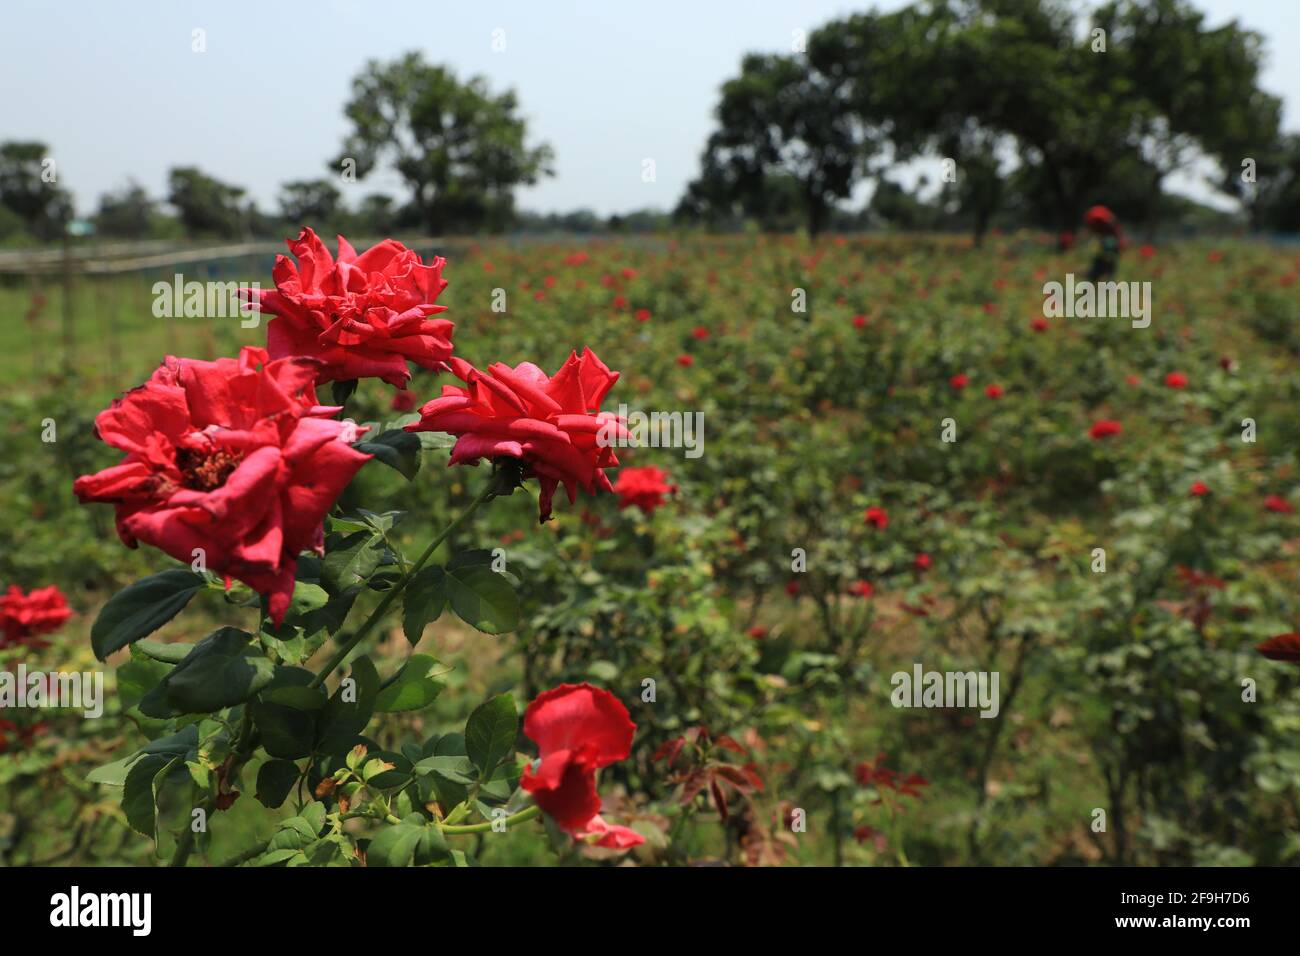 Roses seen at a rose flower garden in Saver.In 250 hectors of land, around 90 percent farmers in Birulia are involved in flower cultivation. The farmers sell each bundles of rose that carry 300 flowers at 1000 Taka. Stock Photo